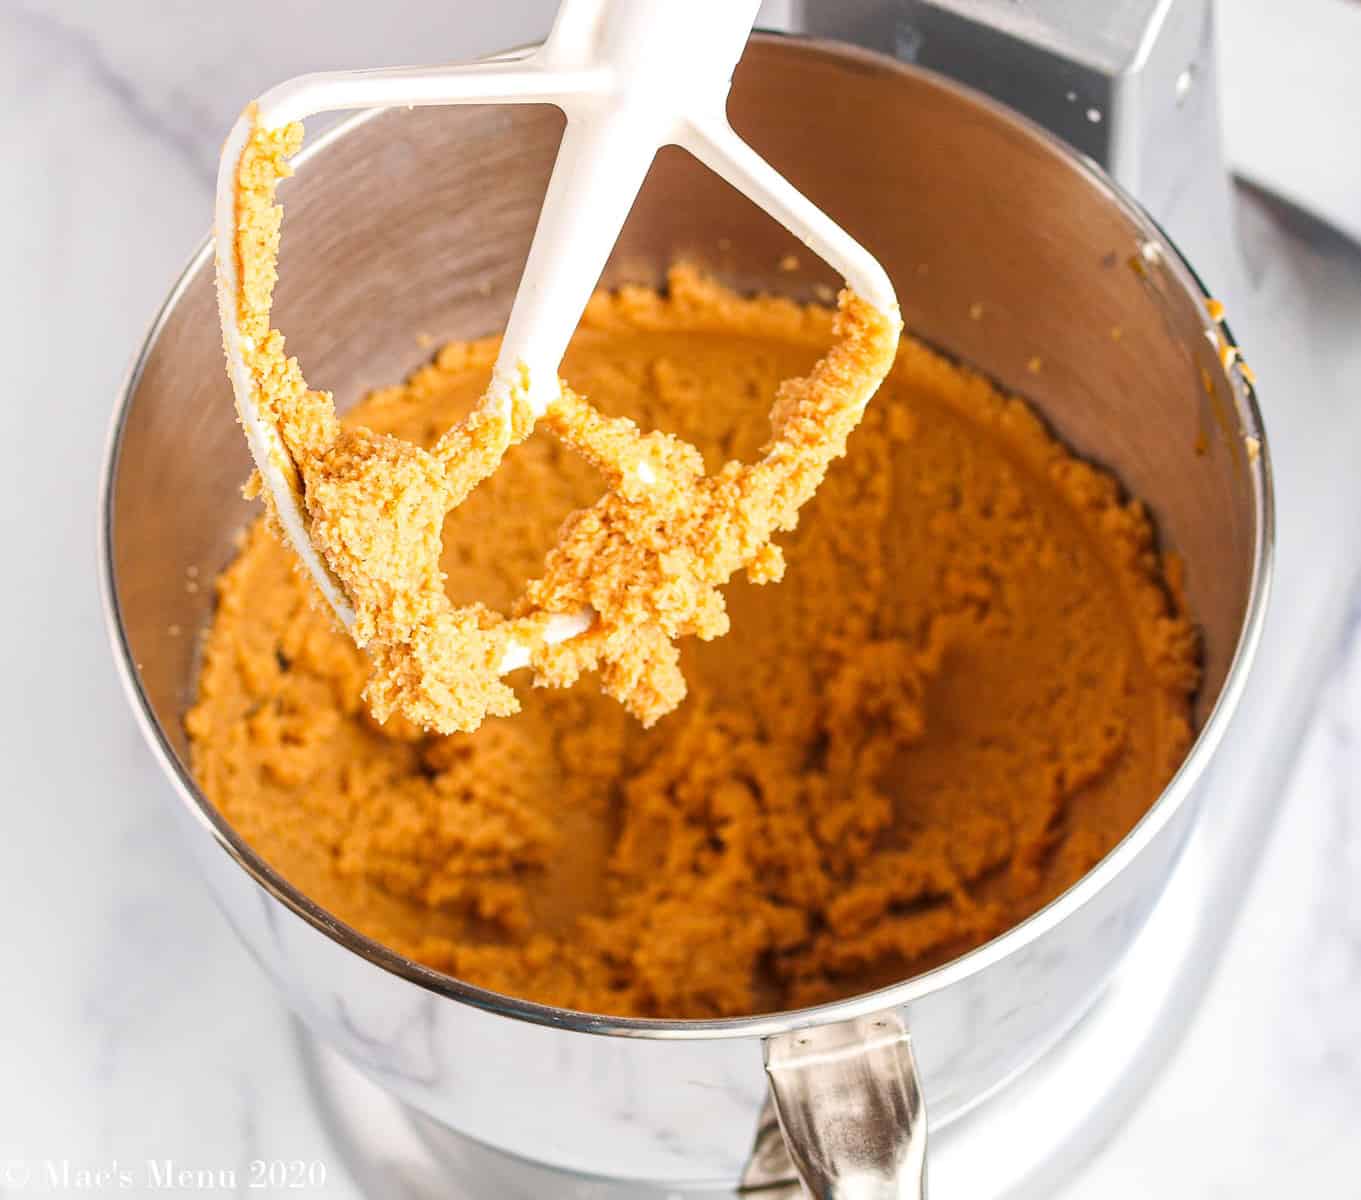 A stand mixer with a mixture of creamed butter, peanut butter, and sugar